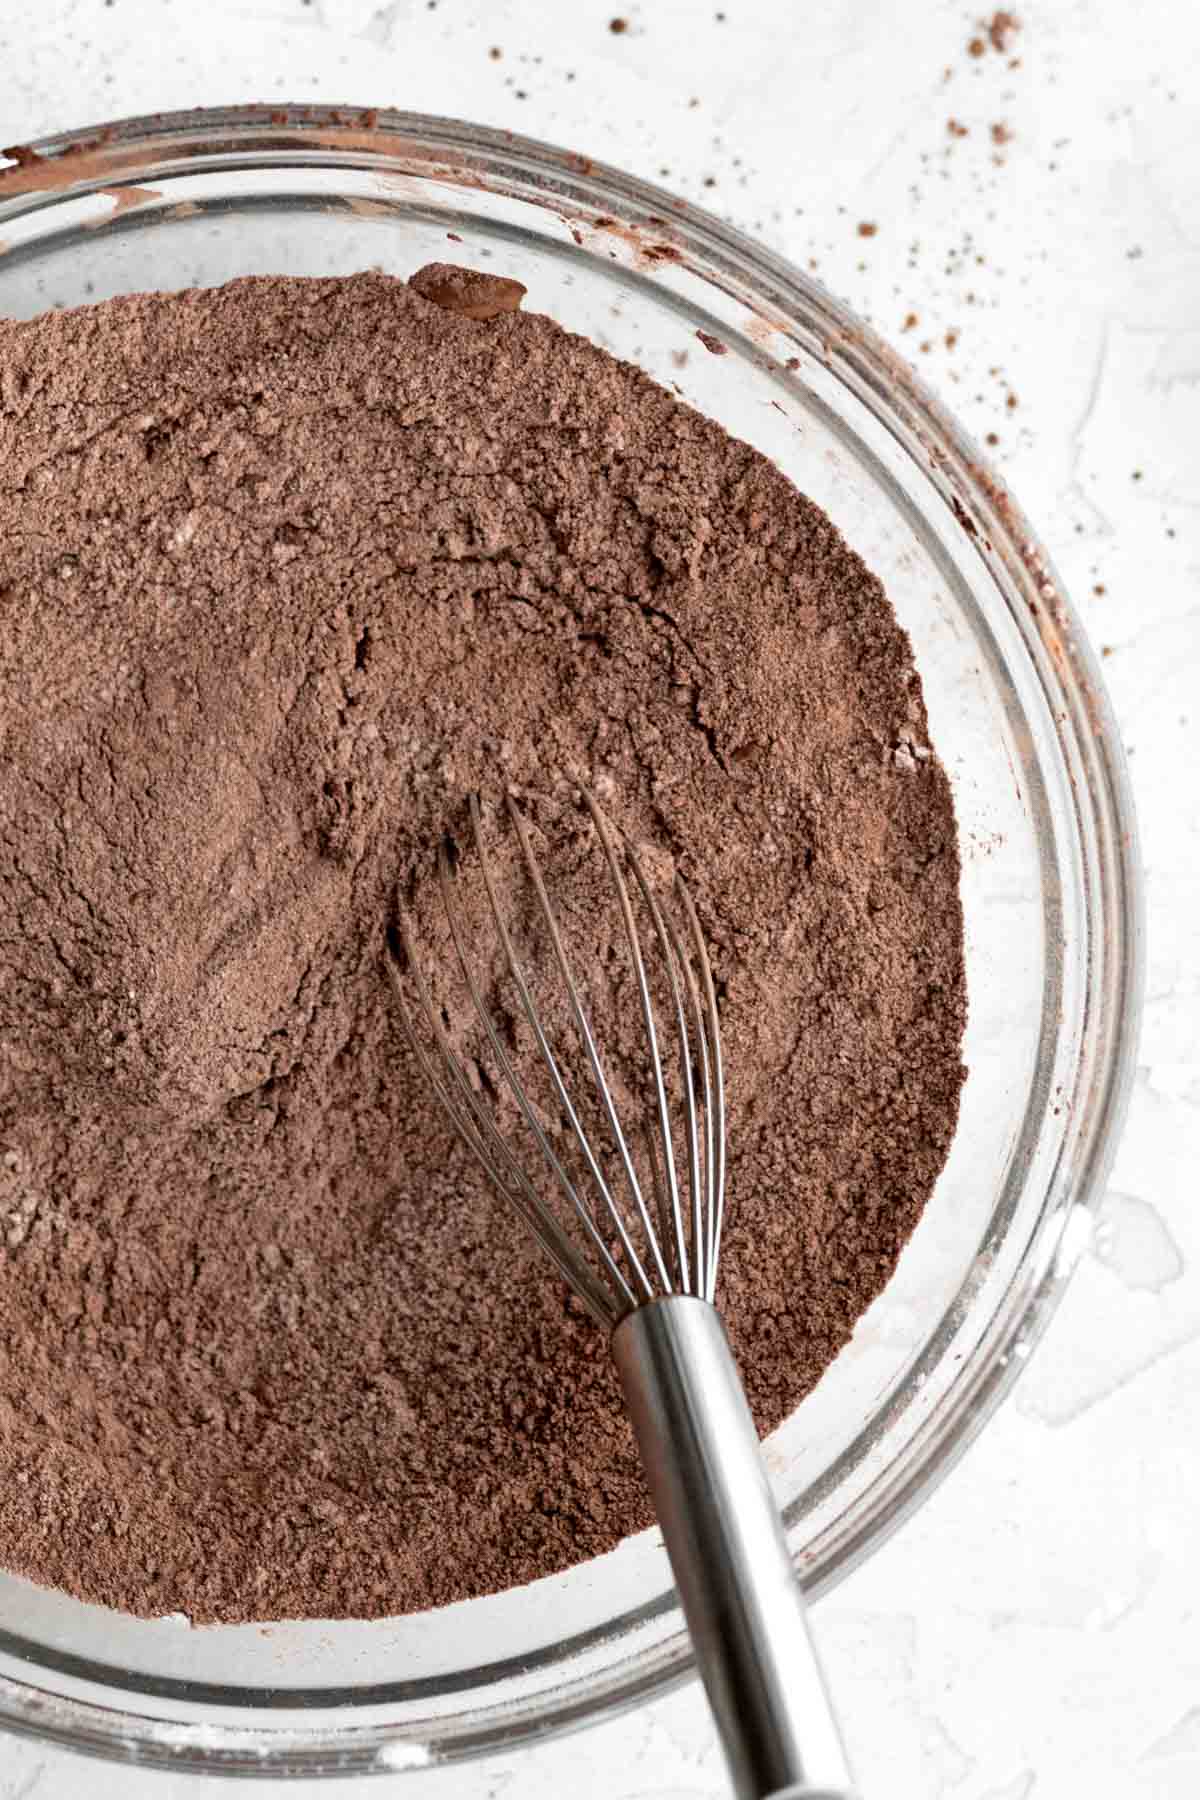 A whisk with the chocolate dry ingredients.